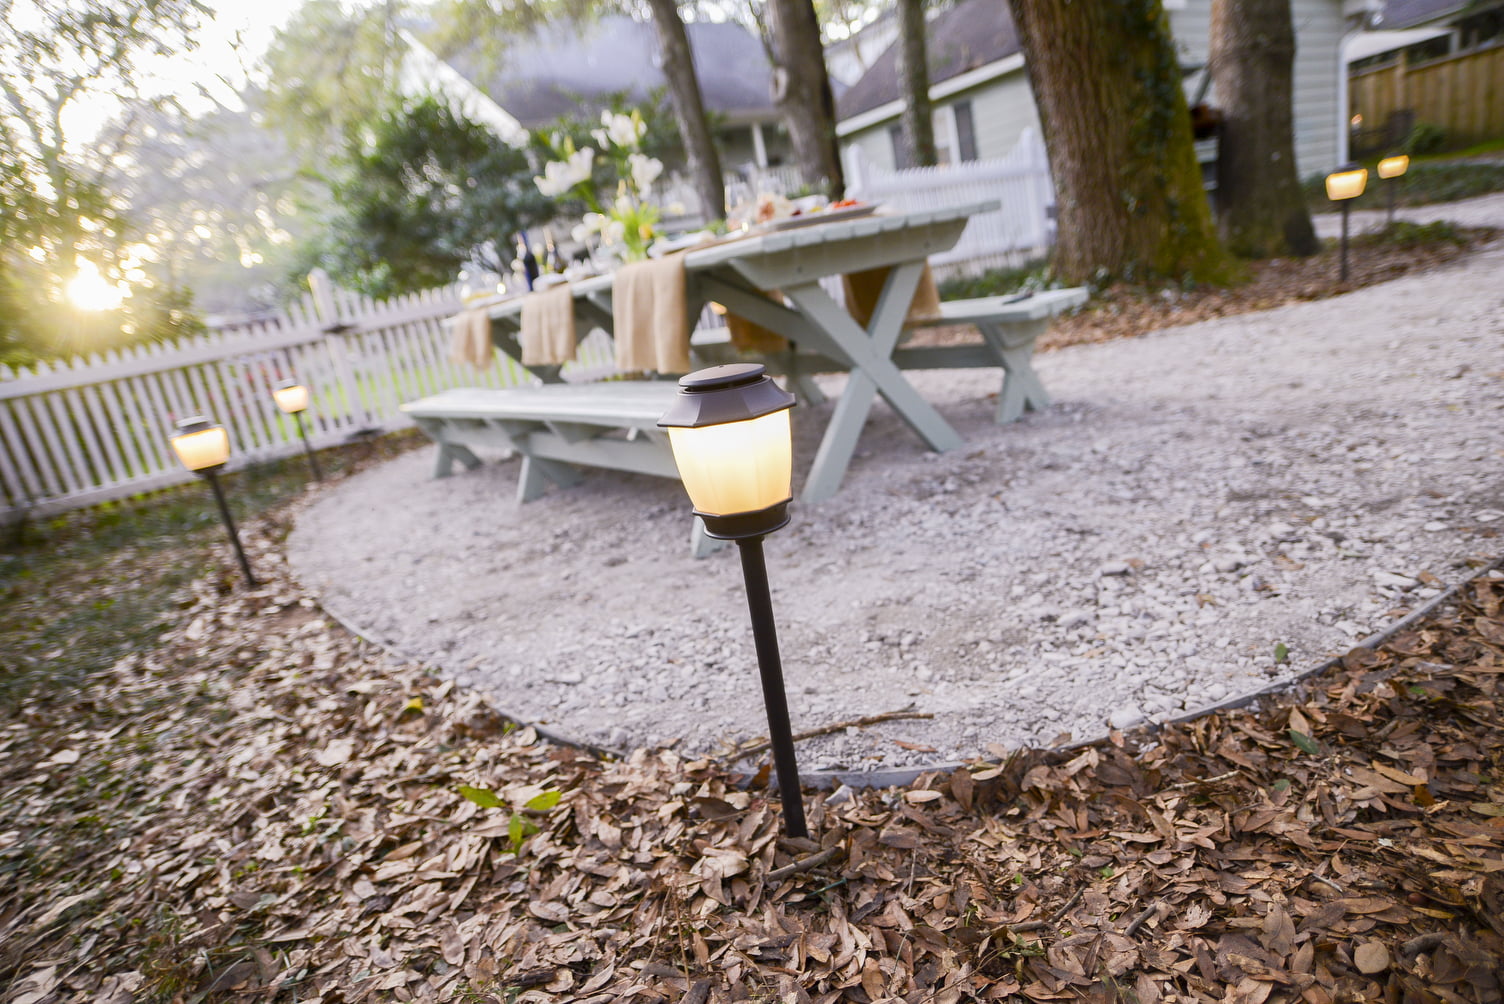 A picnic table on a paver base outdoor surface surrounded by outdoor lighting